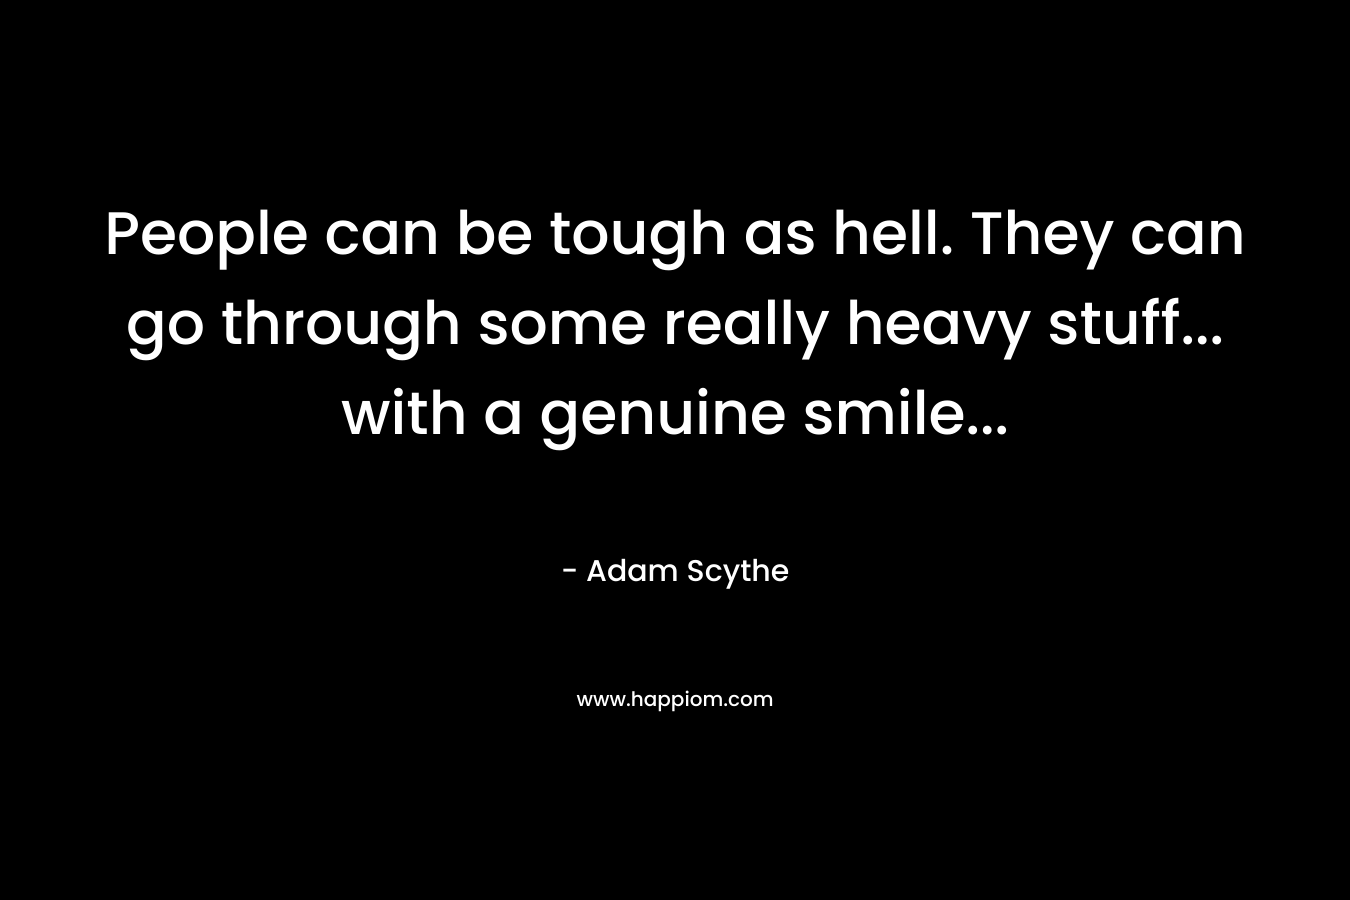 People can be tough as hell. They can go through some really heavy stuff... with a genuine smile...